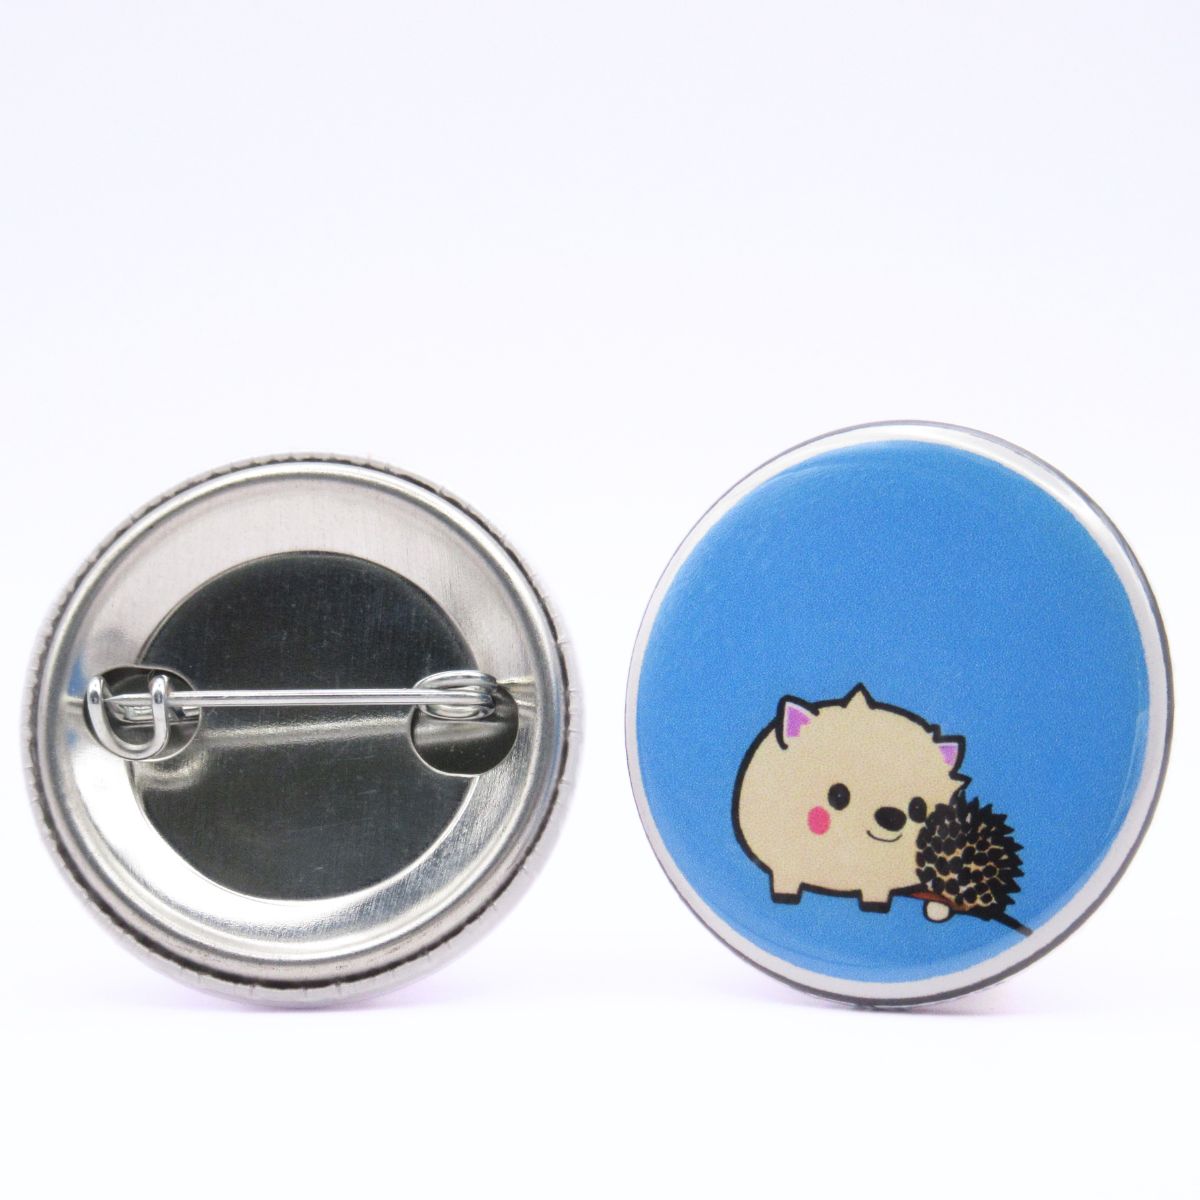 BooBooRoo Pinback Button (i.e. button, badge, pin) of an Adorable Hedgehog. Image showing front and back of high-quality metal button.